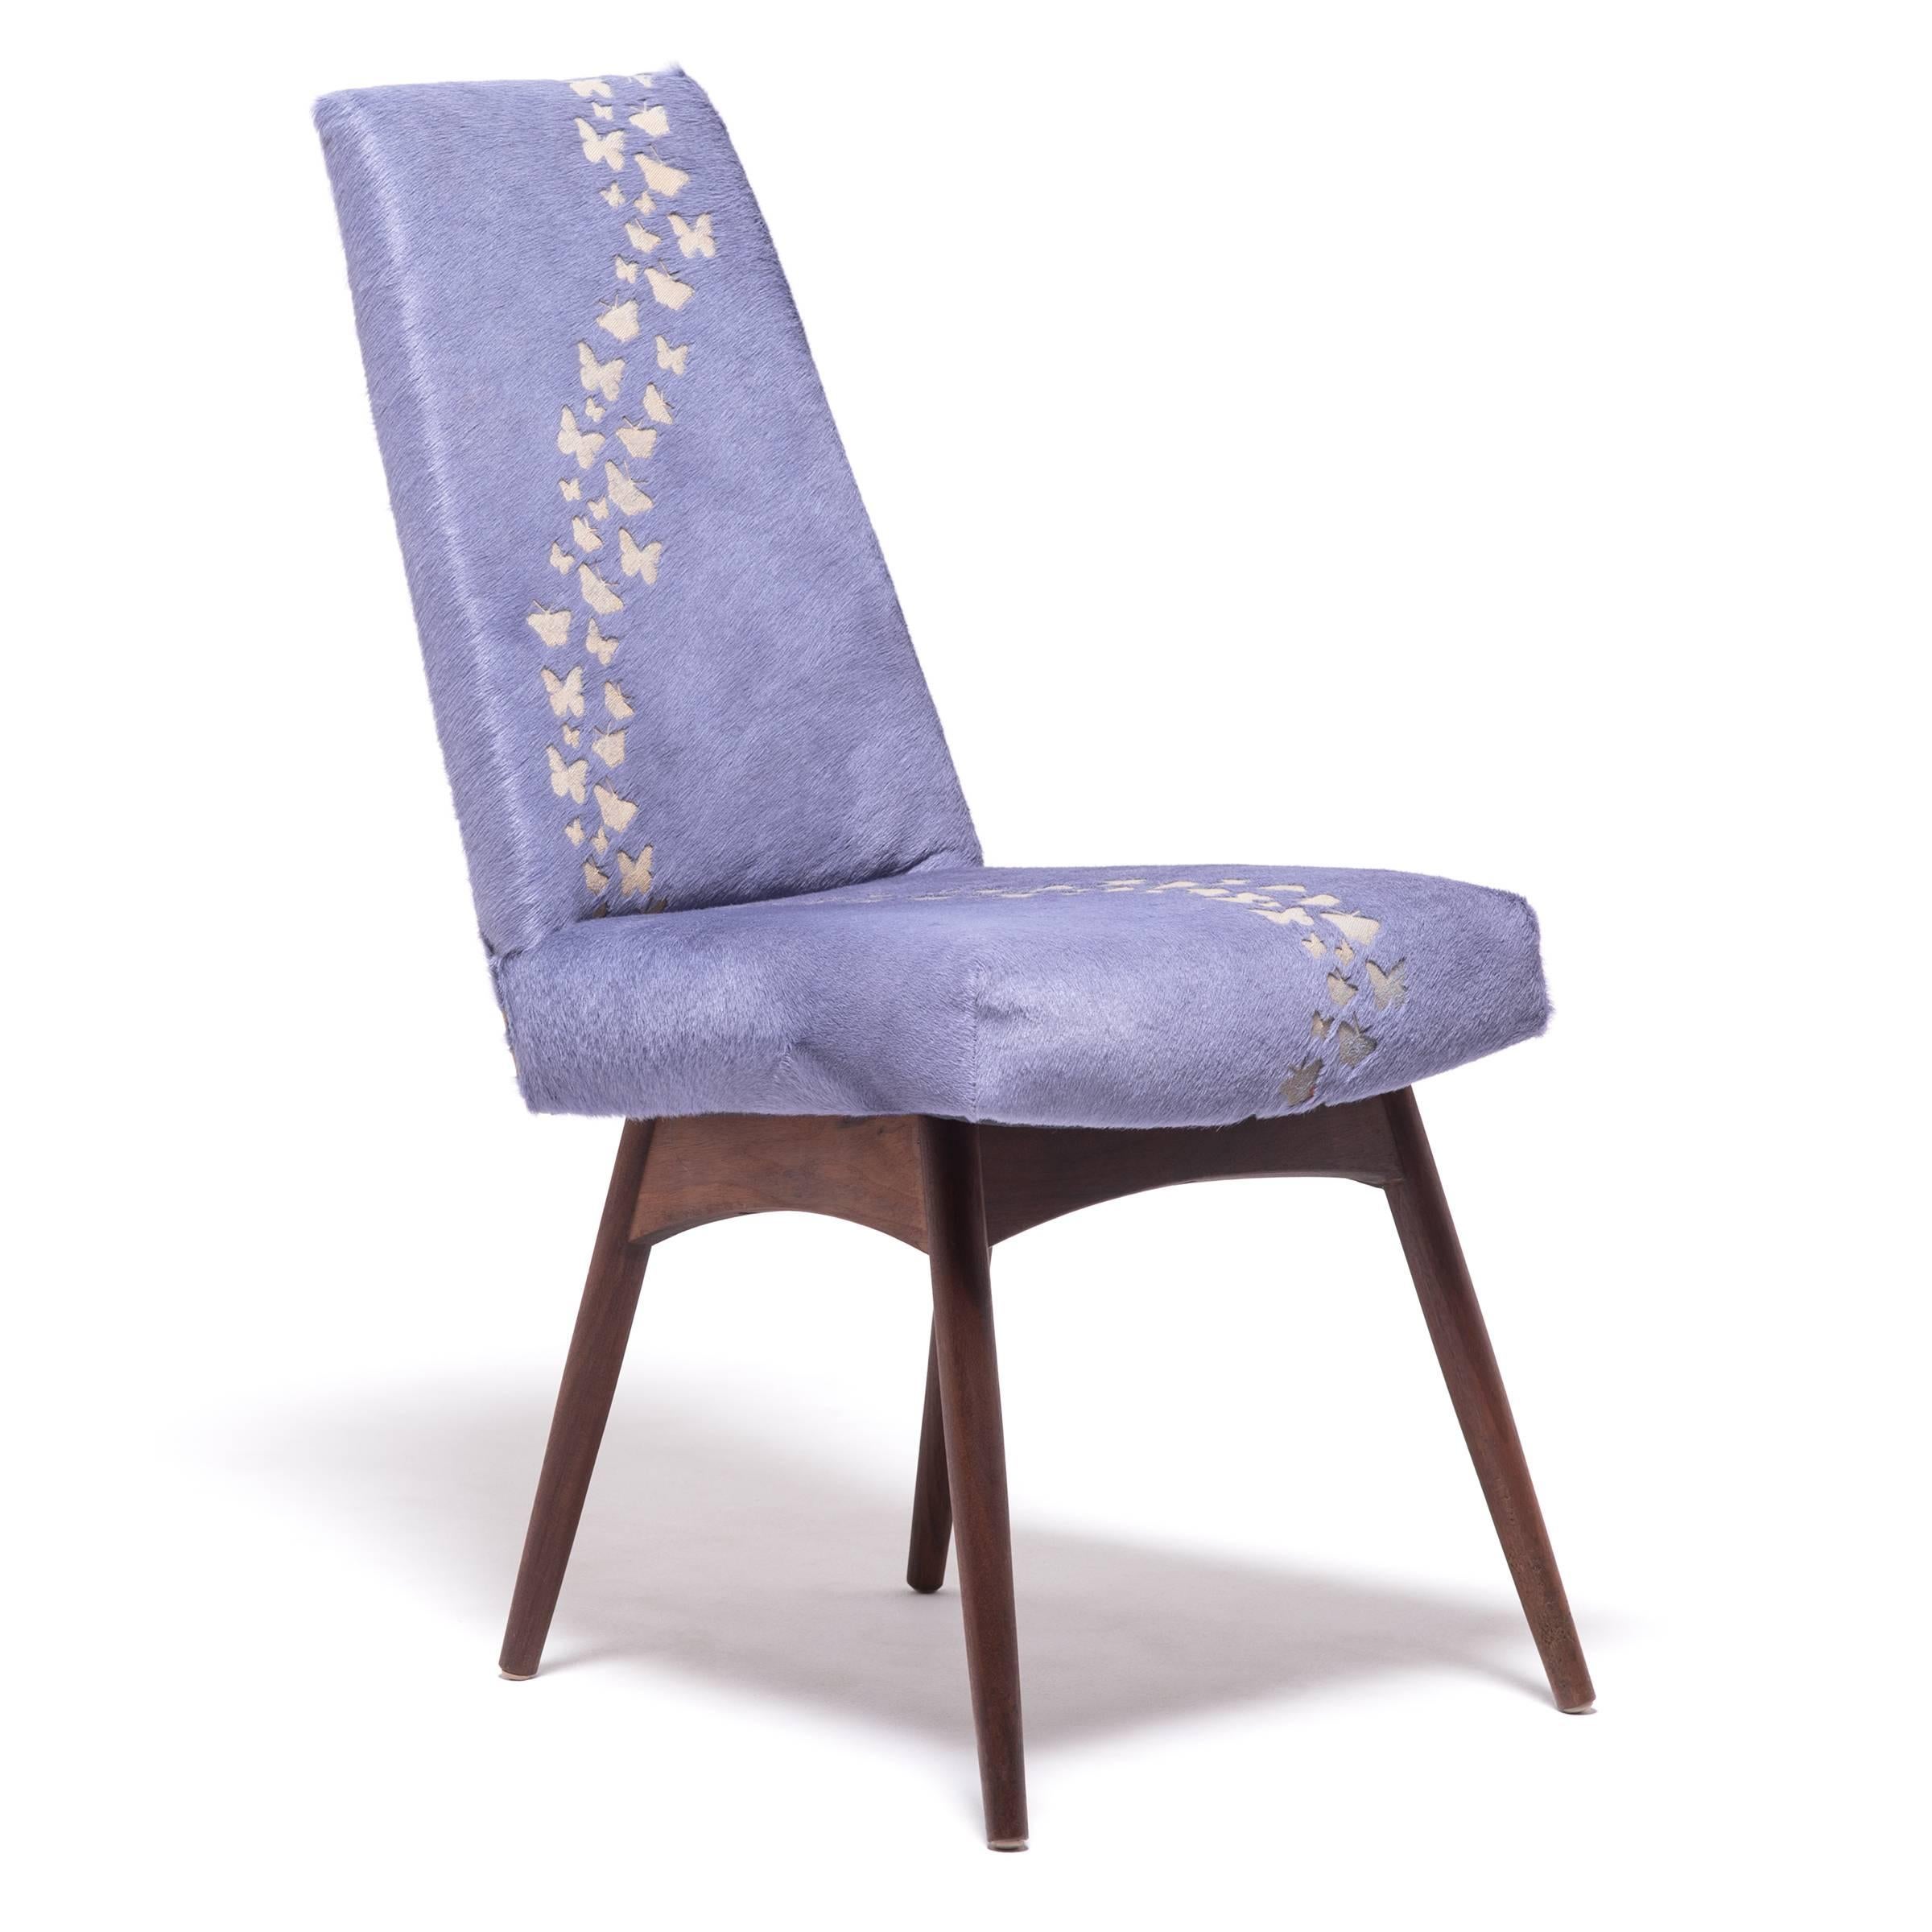 American designer Adrian Pearsall is renowned for his trademark “Atomic Age” look that made his furniture all the rage in the 1950s and 1960s, and a sought-after collectible today. We took the chair in a new direction and reupholstered it in